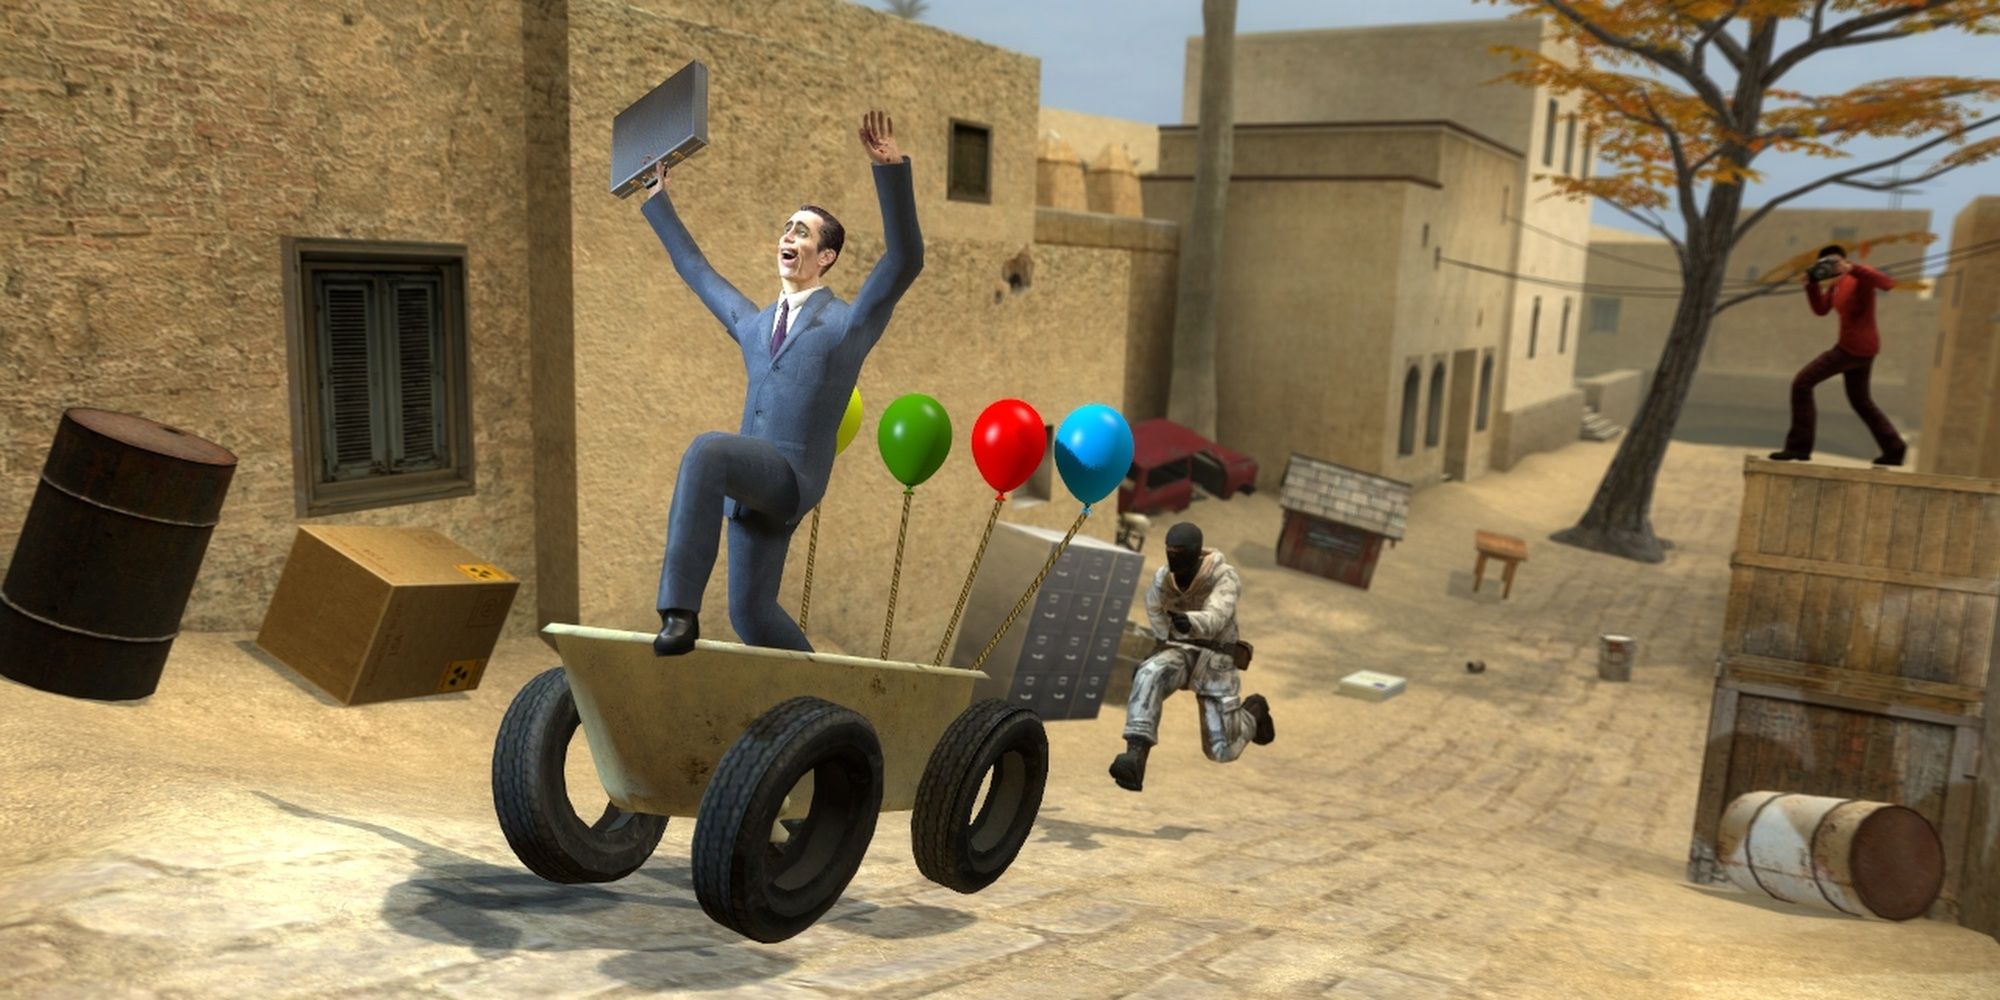 Garry's Mod a suited man with a suitcase flailing his arms and screaming in a wagon as a masked person chases him